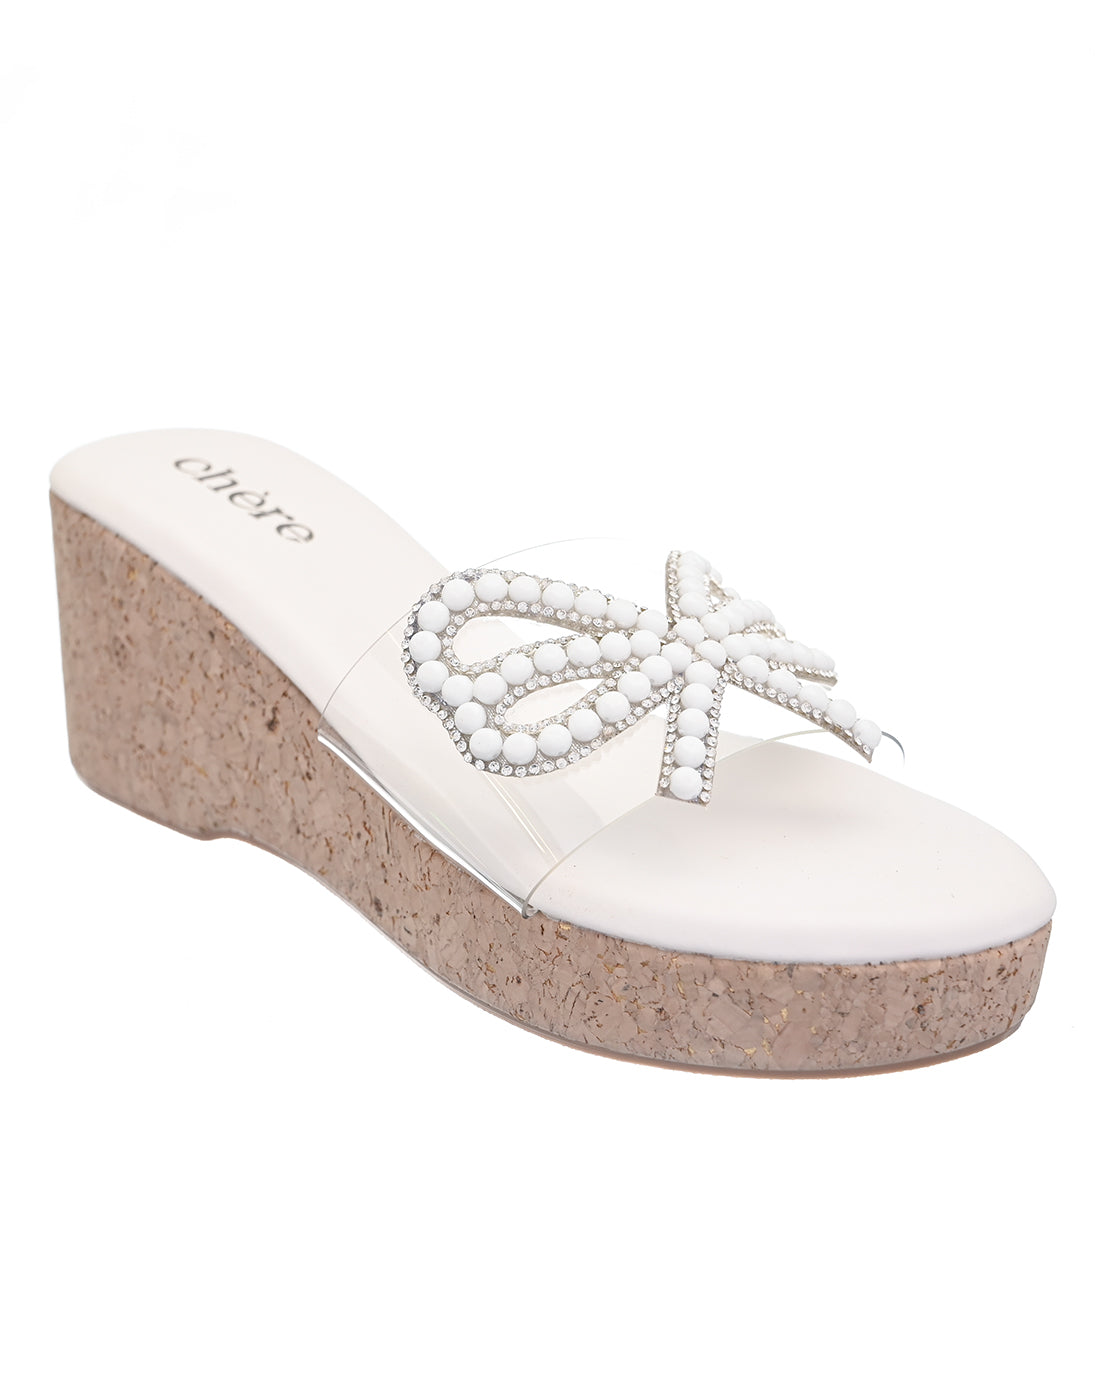 Butterfly Pearled wedges